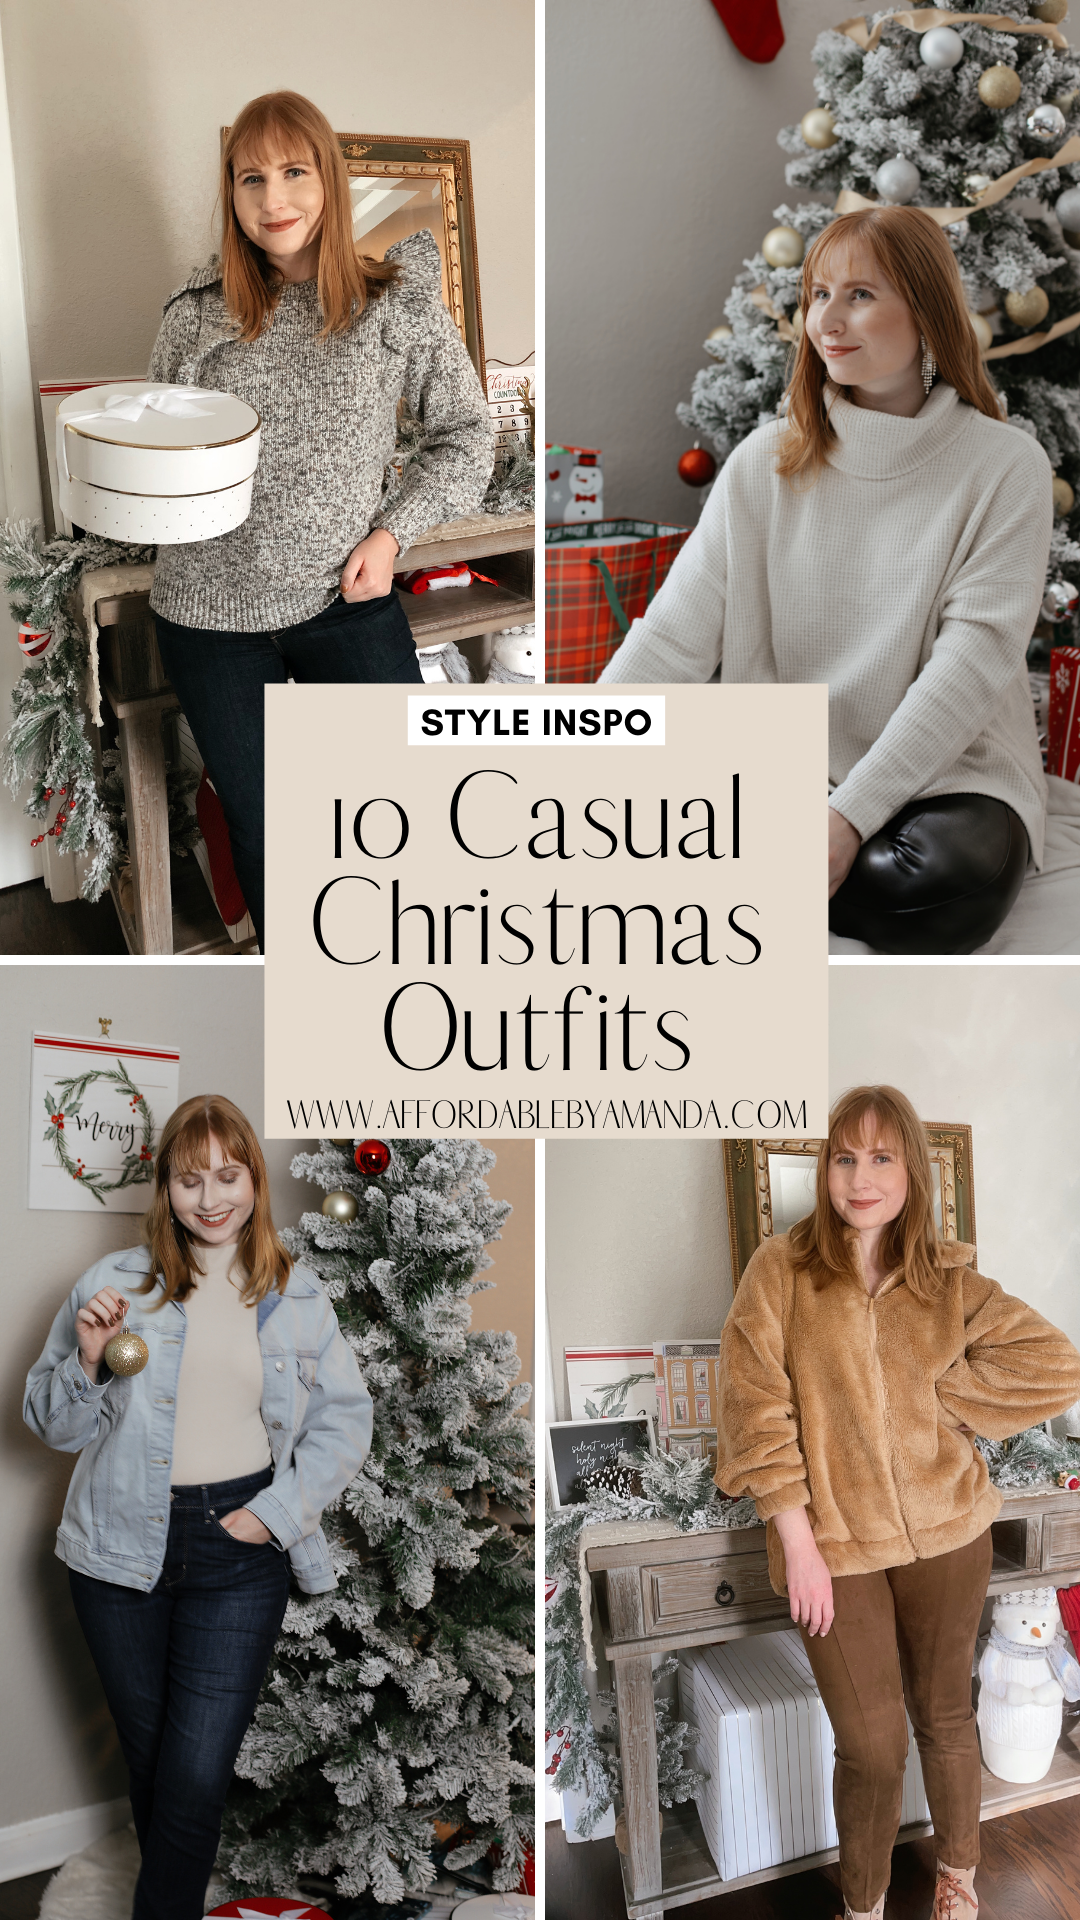 Casual Christmas Outfits - Christmas Outfit Ideas - Cute Christmas Outfit Ideas 2020 - What to Wear on Christmas Day - Holiday Outfits 2020